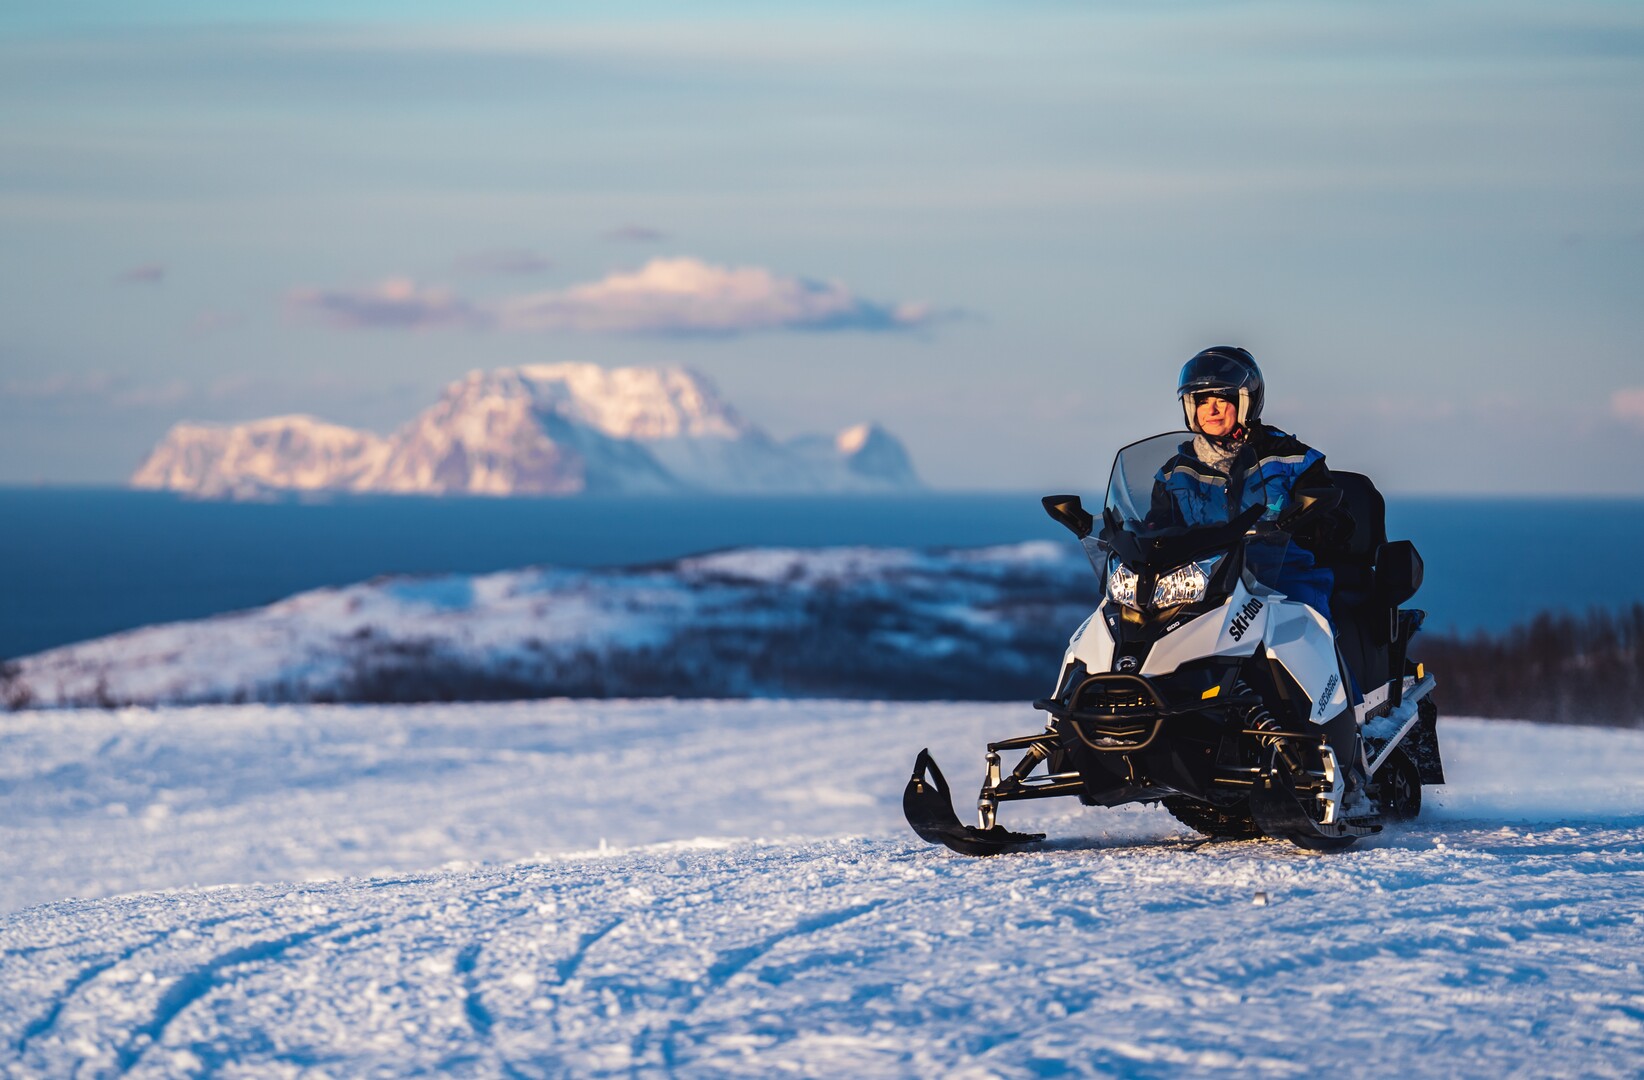 From outer Lyngenfjord with the island of Nord-Fugløy in the far back. And a snowmobile © Petr Pavlíček / Visit Lyngenfjord